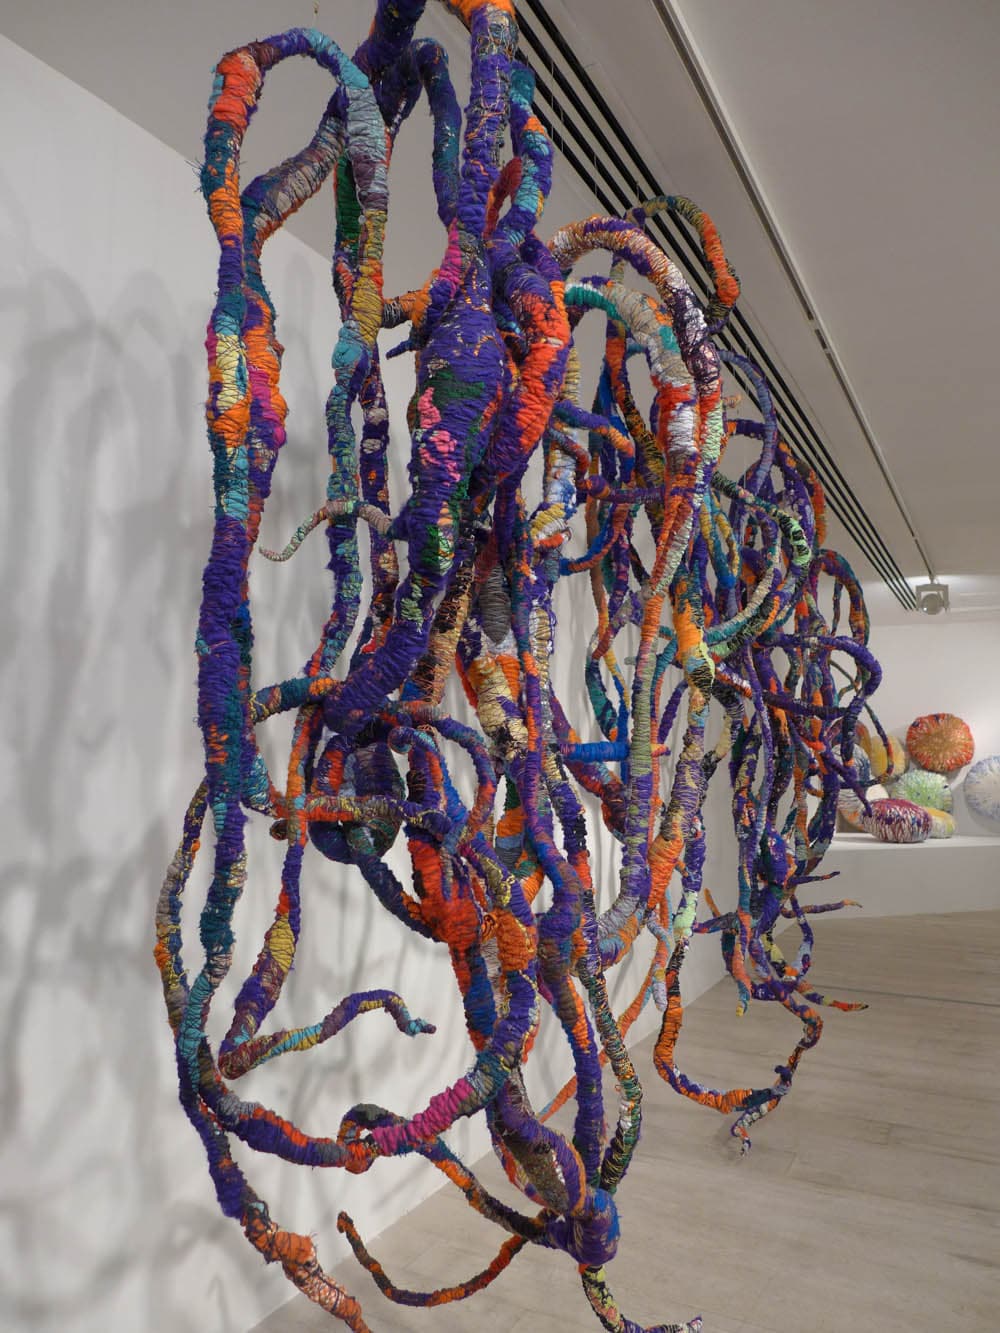  Sheila Hicks: Foray into Chromatic Zones at the Hayward Gallery Project Space, London